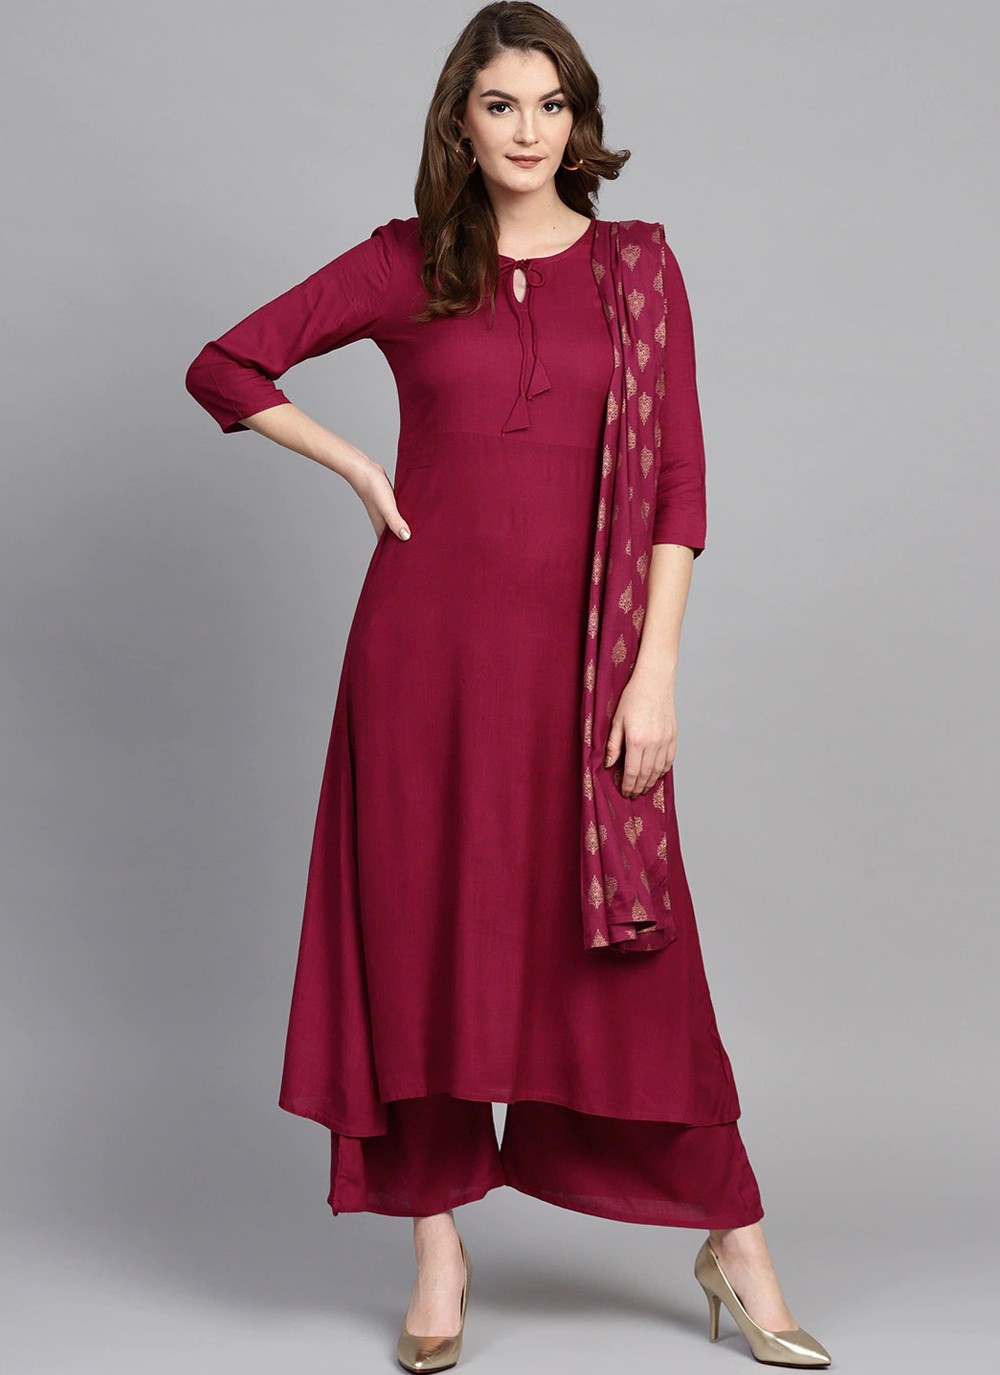 Shop Online Rayon Magenta Readymade Suit : 173798